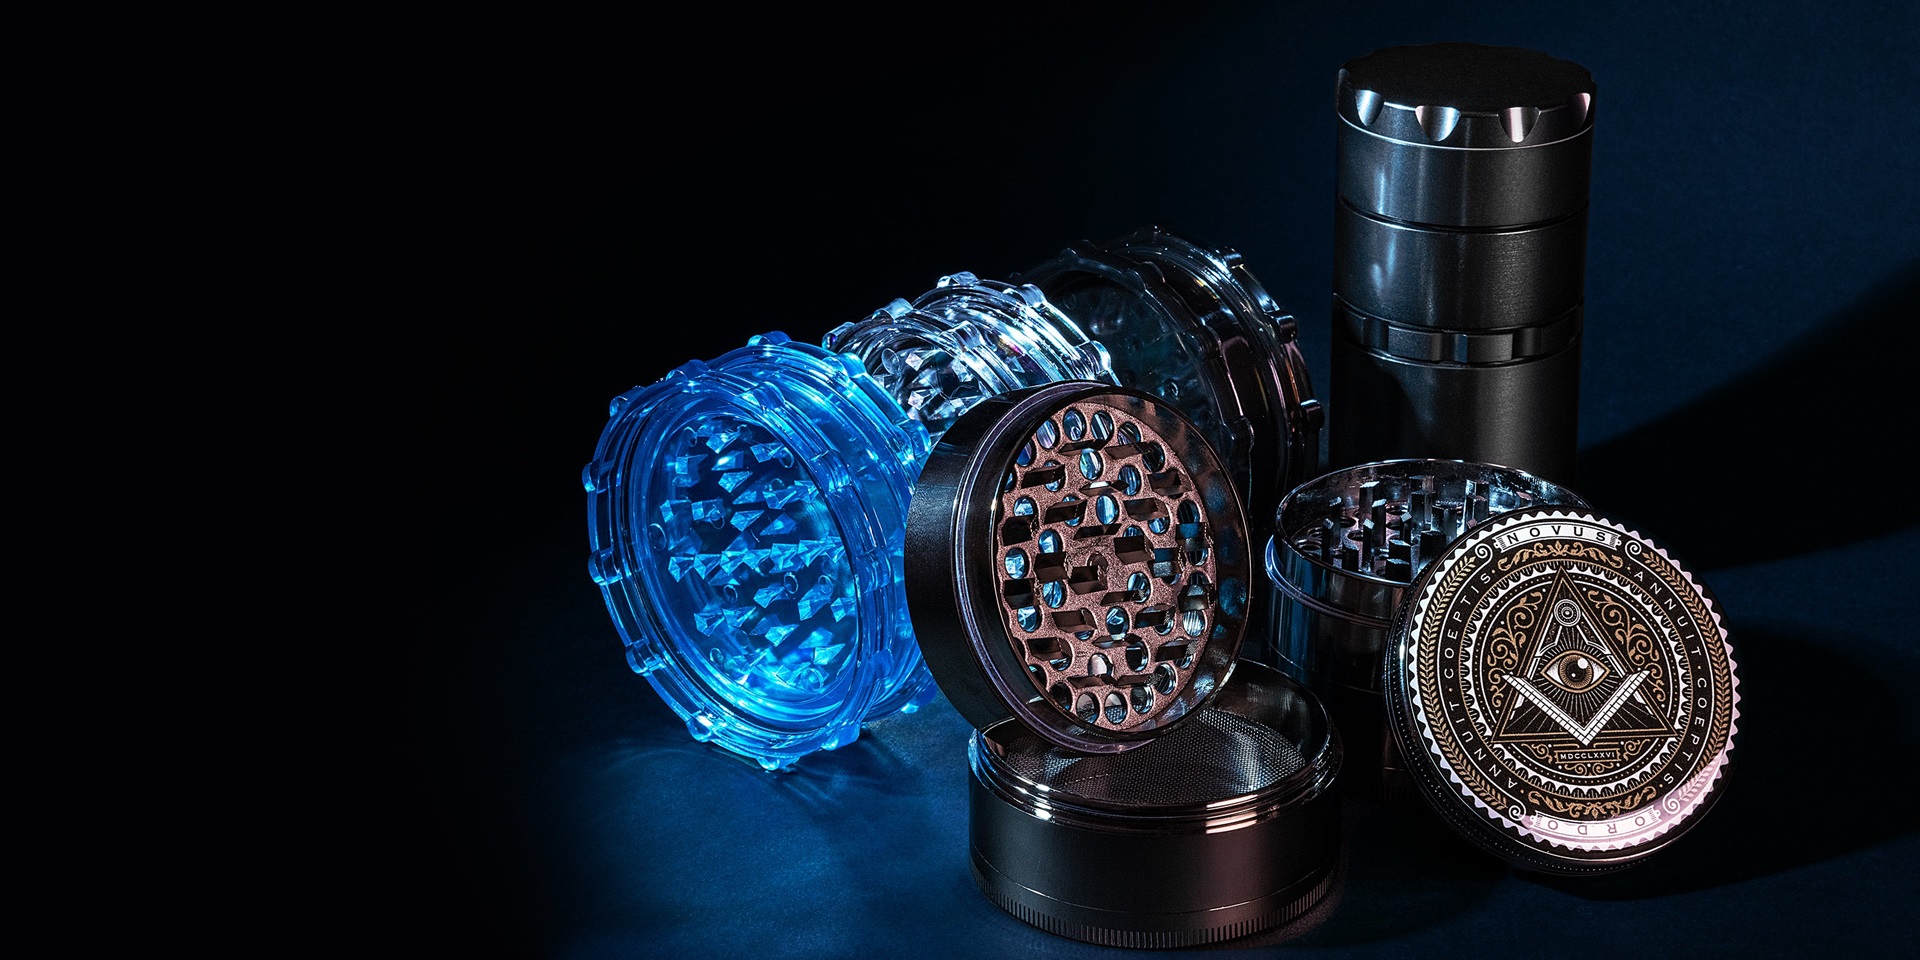 The Power Grind Exploring High-Performance Weed Electric Grinders